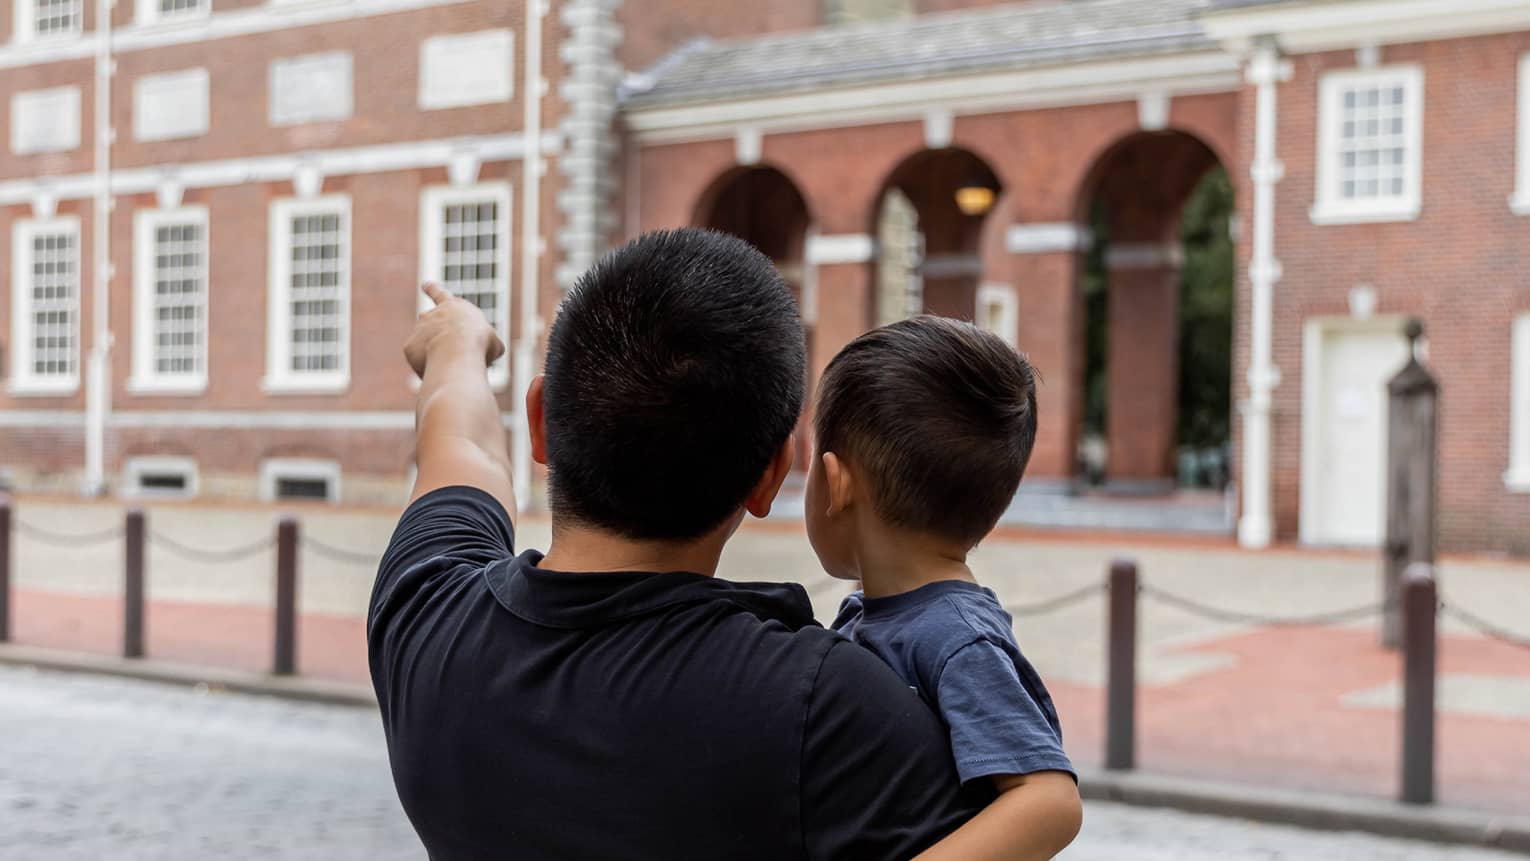 A man holding a boy and pointing at an old brick building.